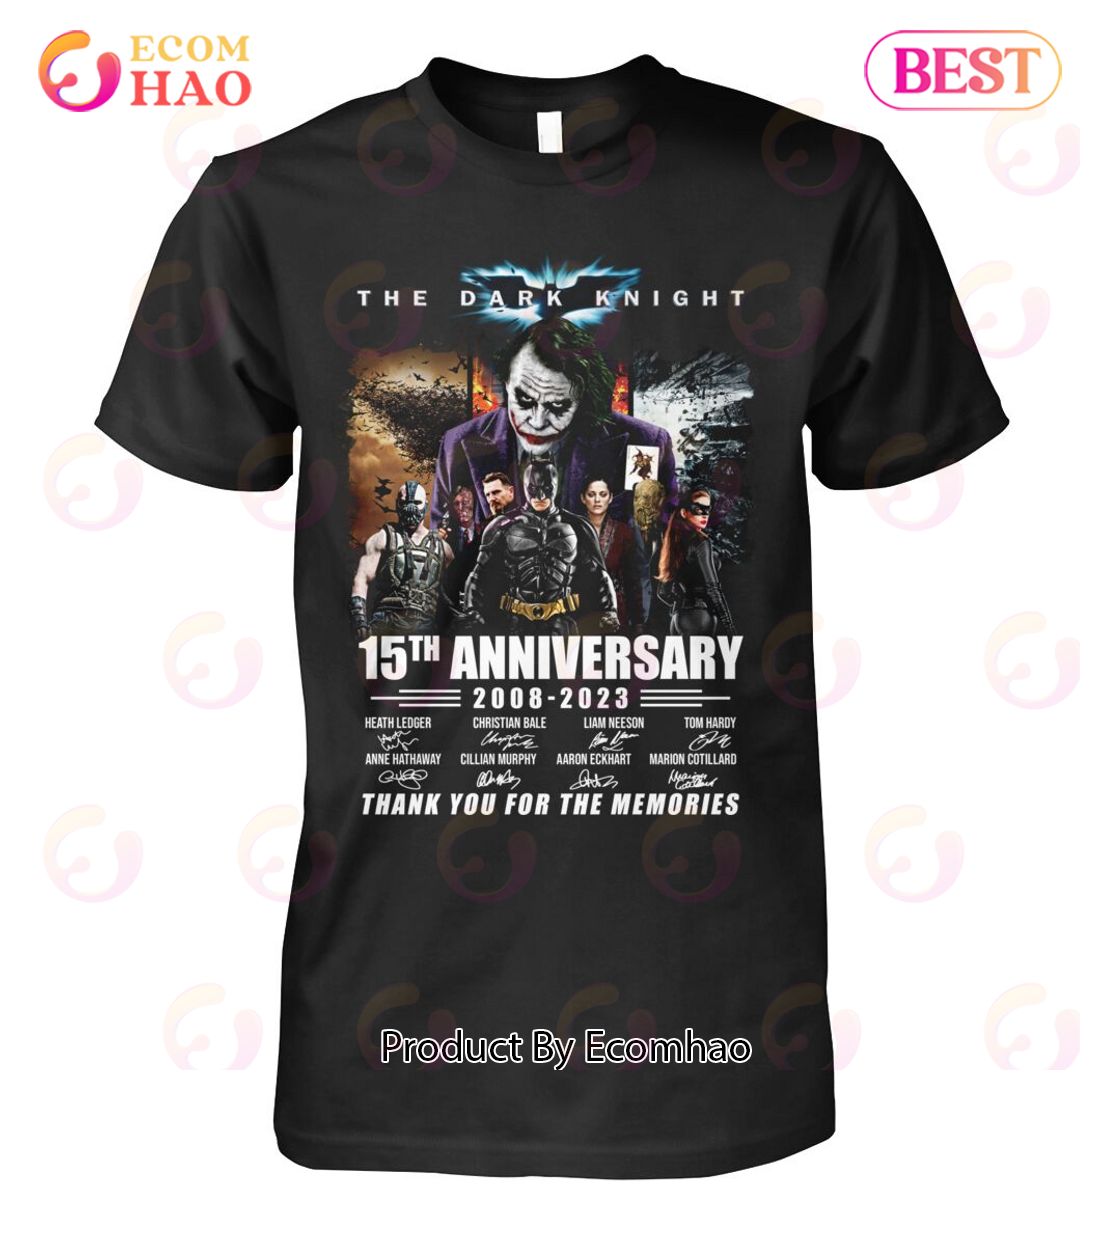 The Dark Knight 15th Anniversary 2008 - 2023 Thank You For The Memories T-Shirt